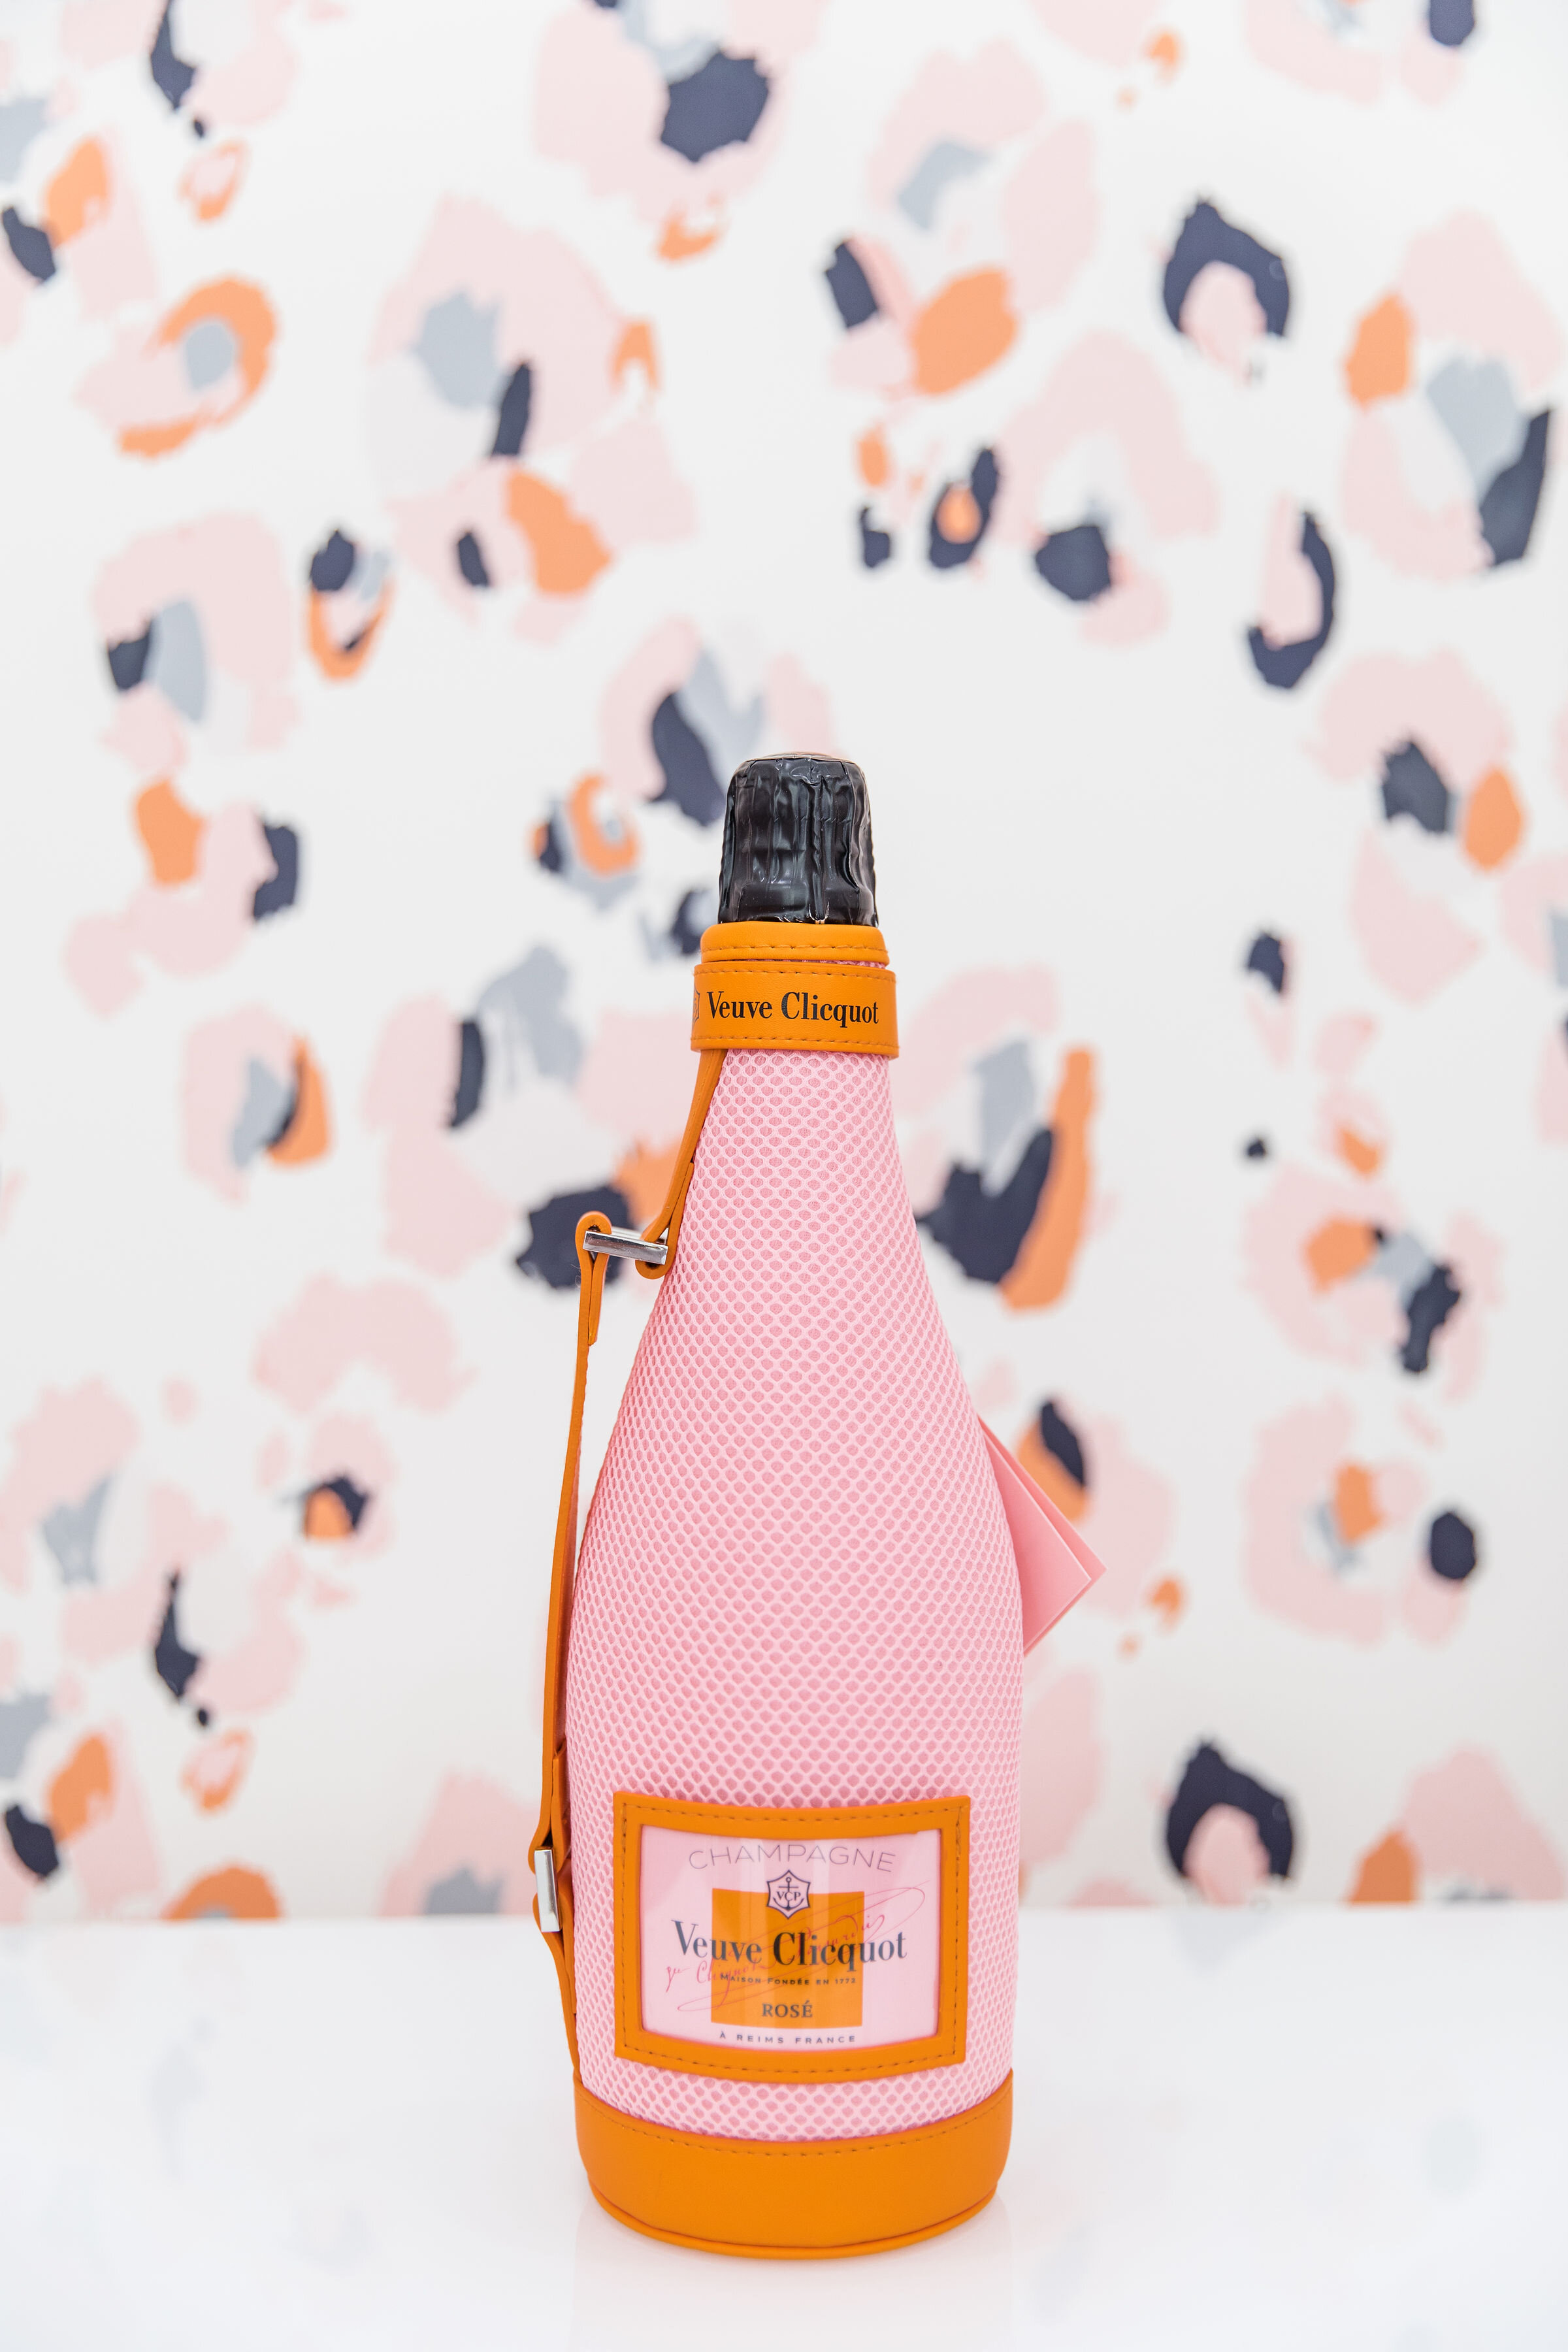 The-Caroline-Doll-Champagne-Is-Always-The-Answer-Lifestyle-Influencer-National-Beverage-Day-Champagne-Life-Veuve-Clicquot-Glass-Of-Sparkling-Bubbly-Sweet-2.jpg